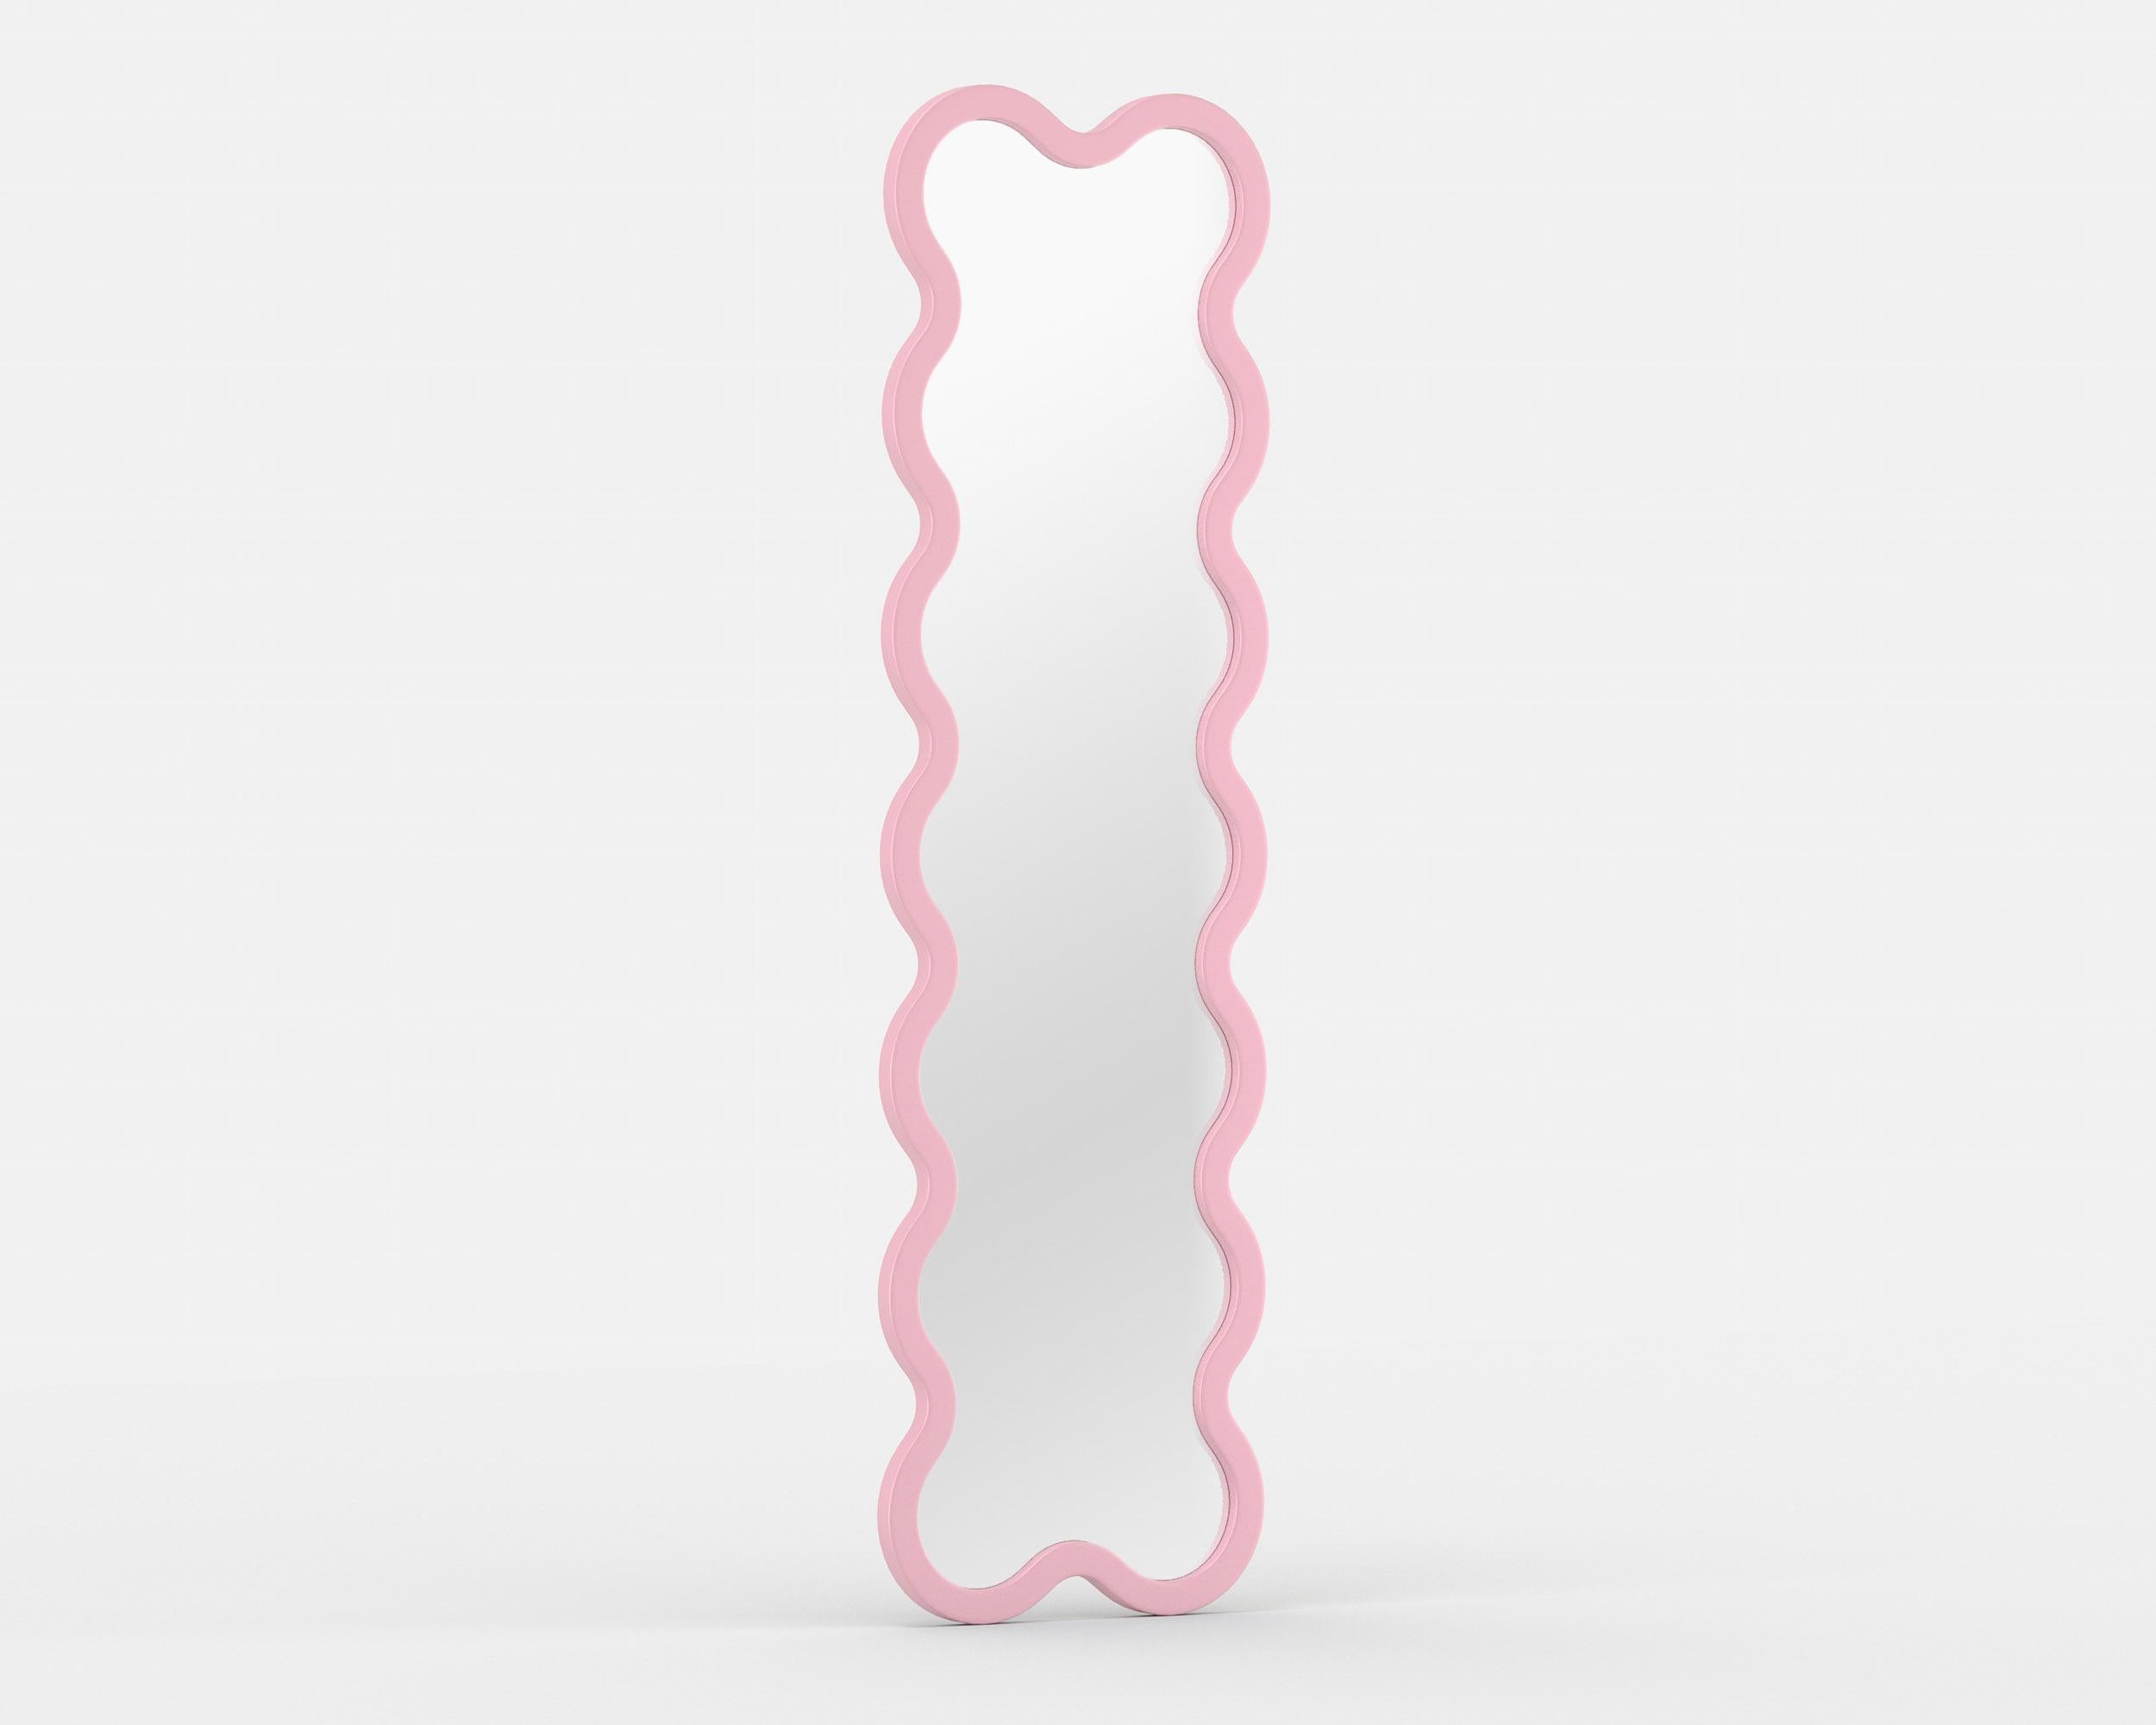 Contemporary Mirror 'Hvyli 14' by Oitoproducts.
Light Pink: RAL3015

Dimensions:
H 180 x W 52 x D 3.5 cm
H 71 x W 20.5 x D 1.3 in

Materials: Painted ecological water paint MDF, silver glass mirror, special rubber feet.

About
Melted, delicate forms